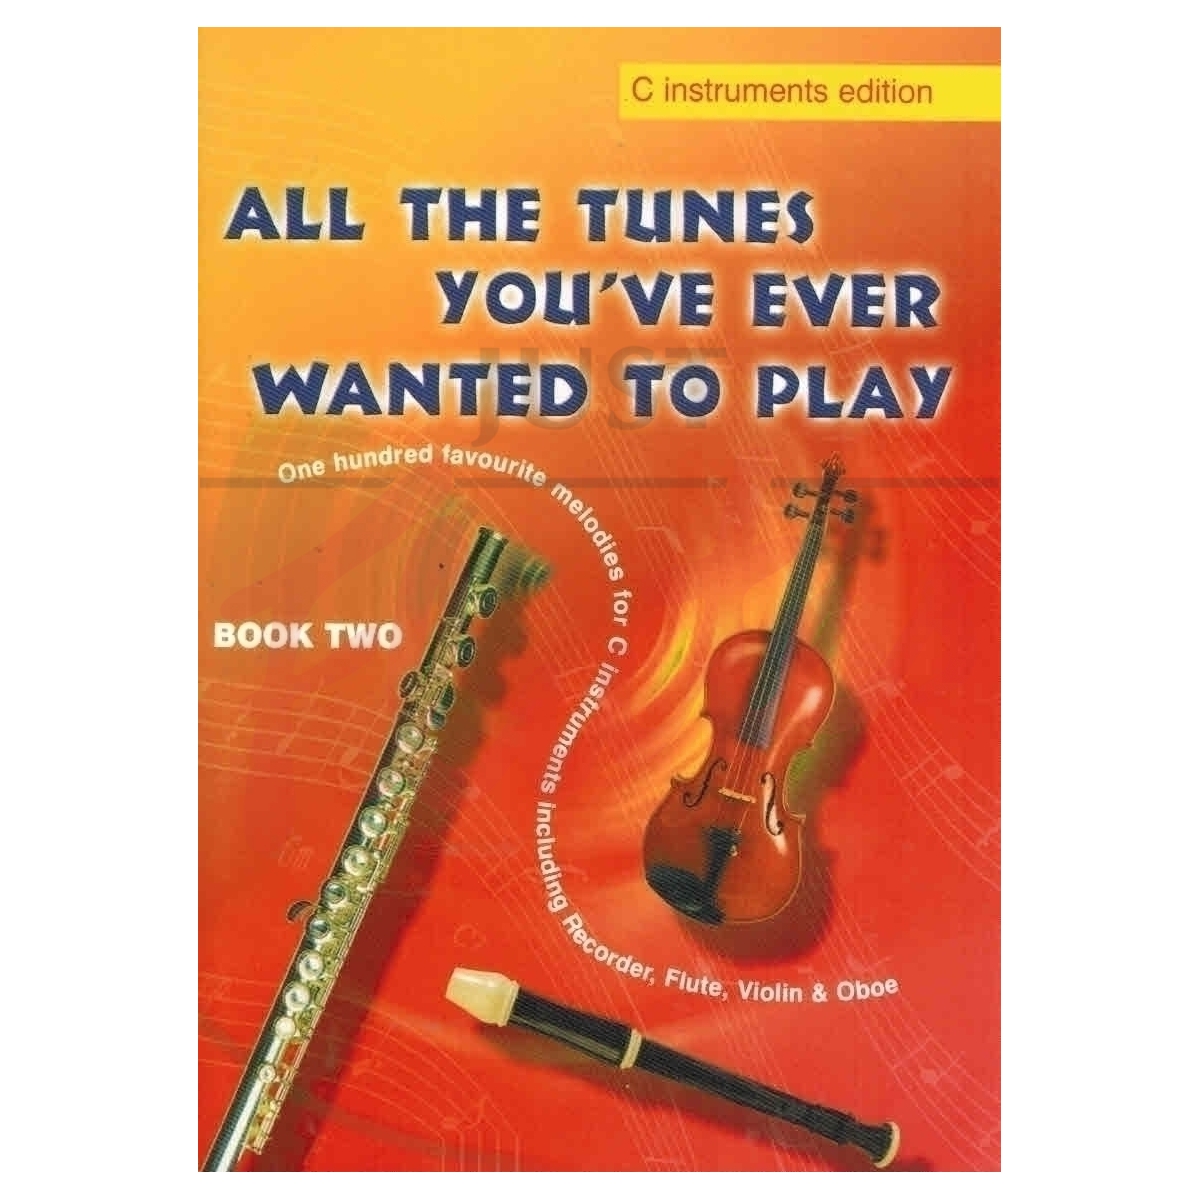 All the Tunes You've Ever Wanted to Play Book 2 [C Instruments]